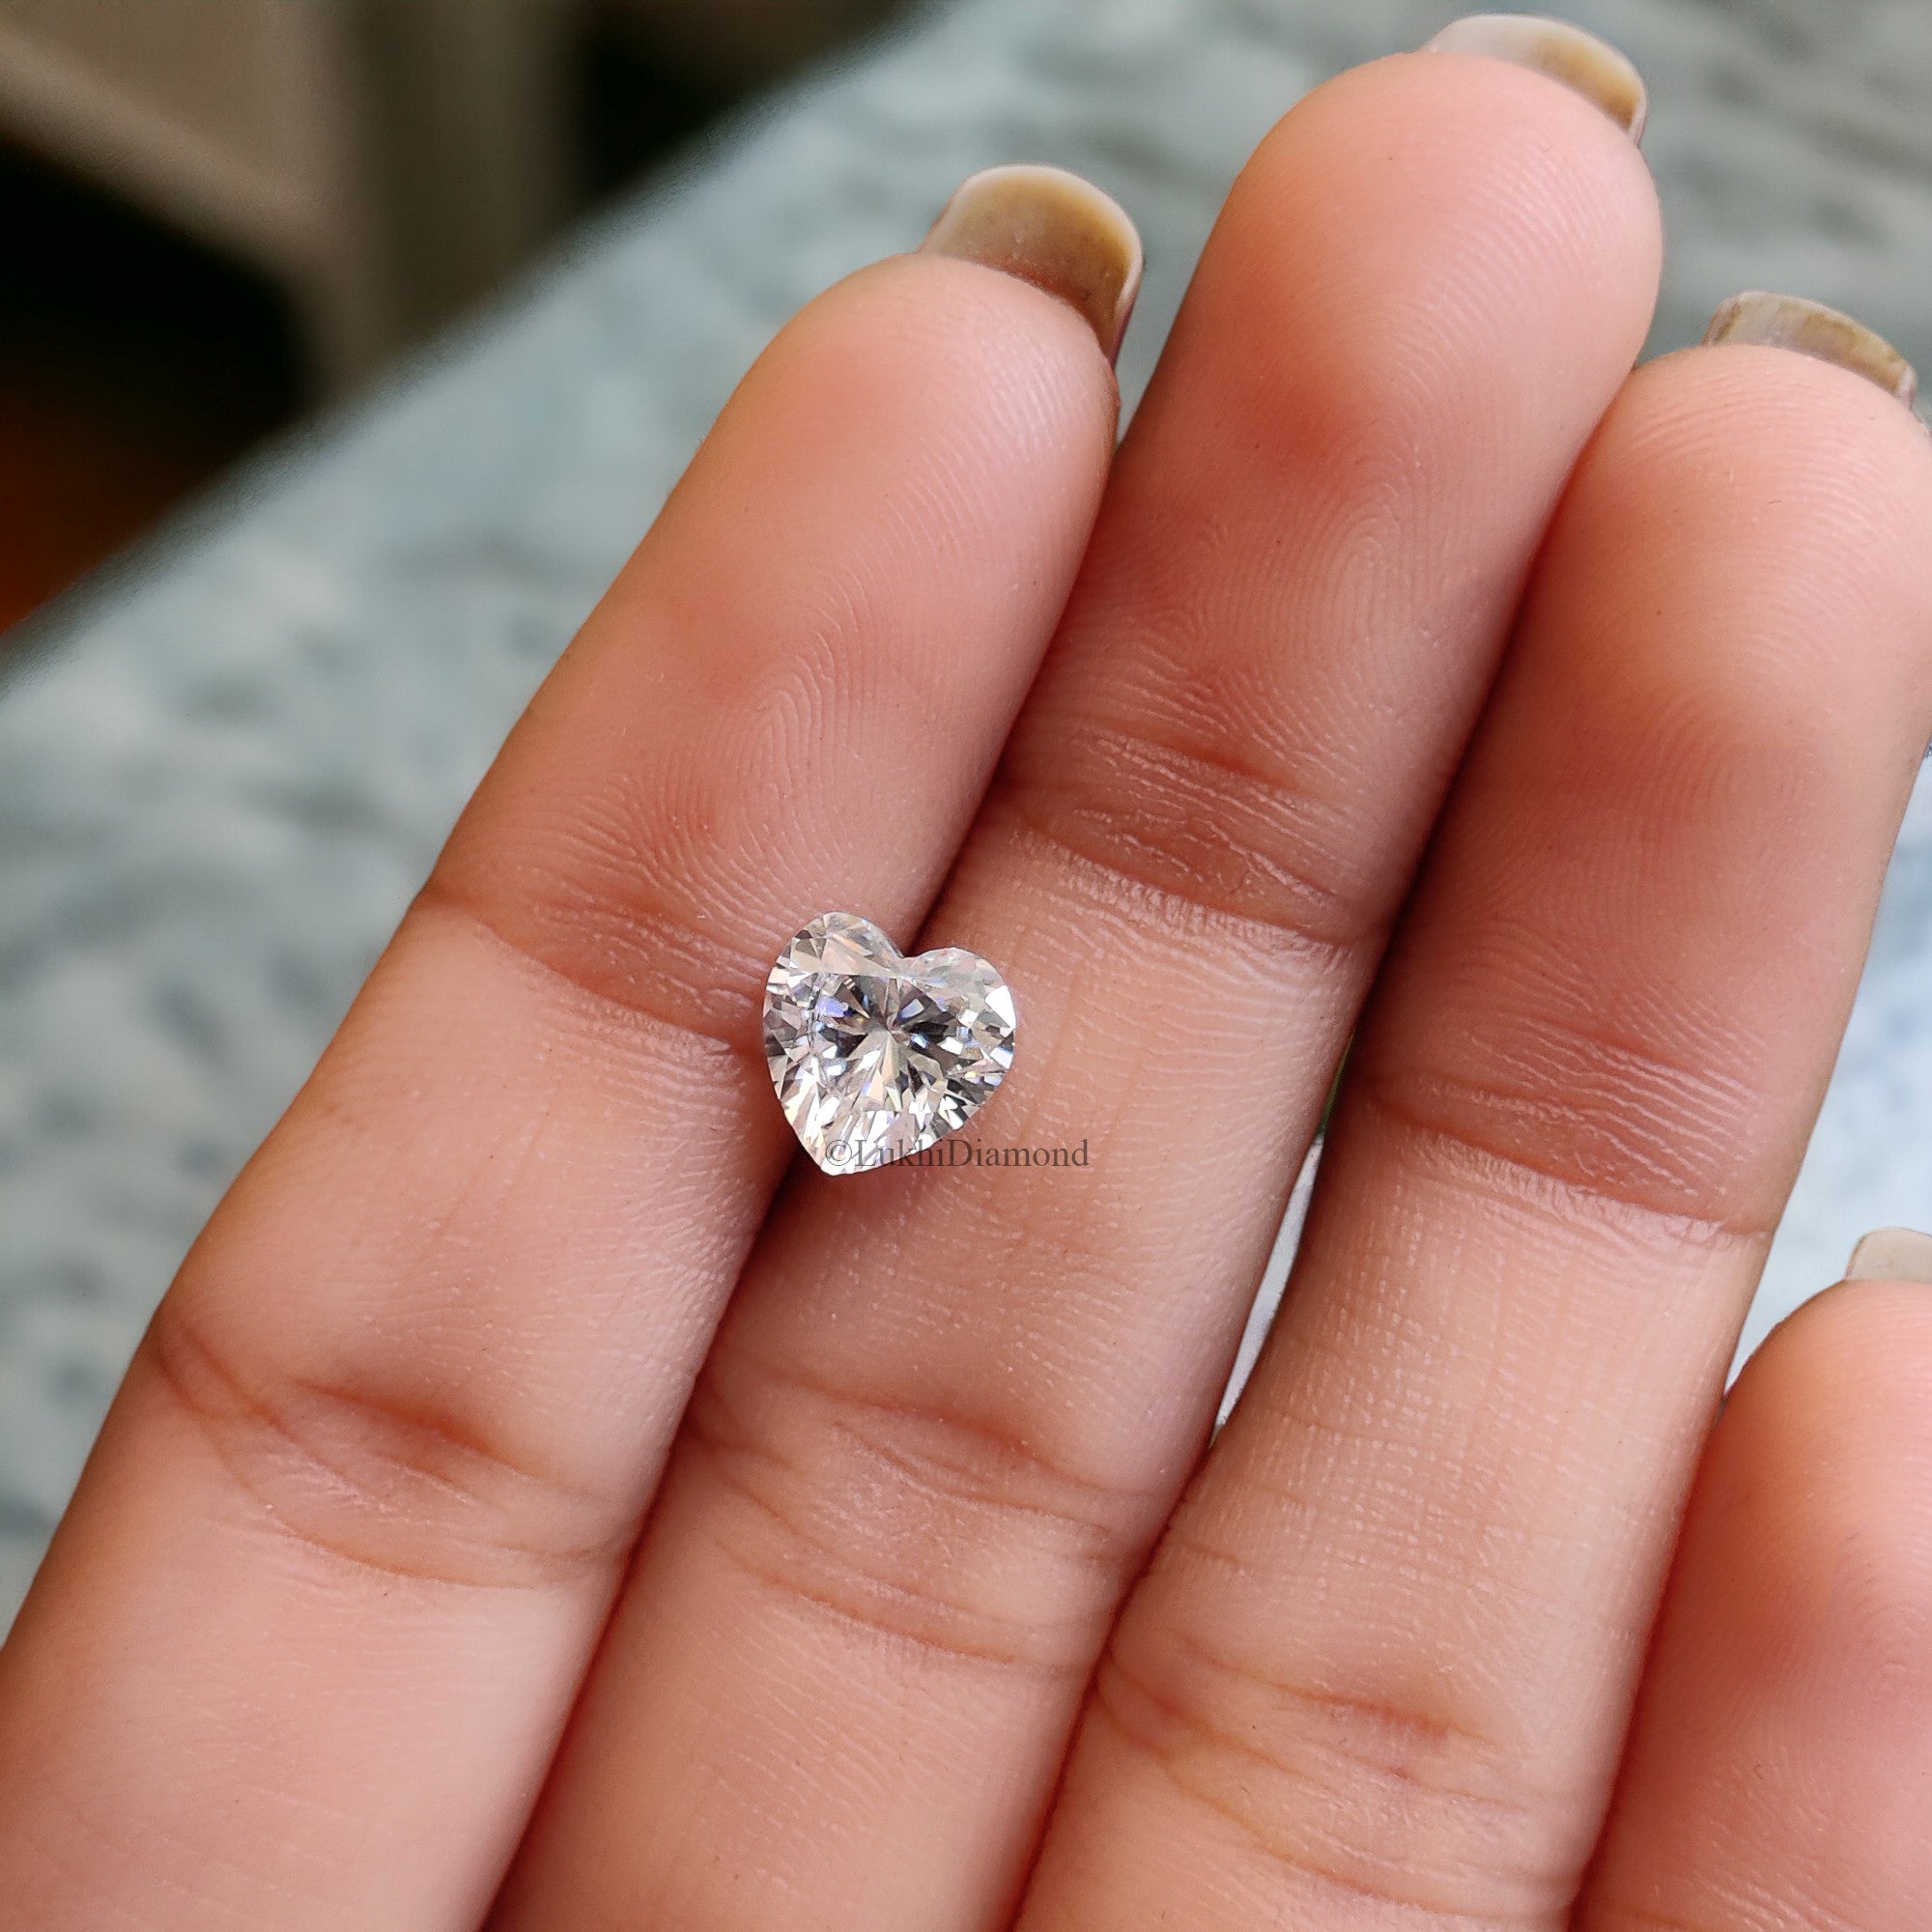 Heart Brilliant Cut Loose White Moissanite Stone 1.0 To 5.0 CT Vintage Antique Handcrafted Eye Clean Moissanite Engagement Gift Ring Q132